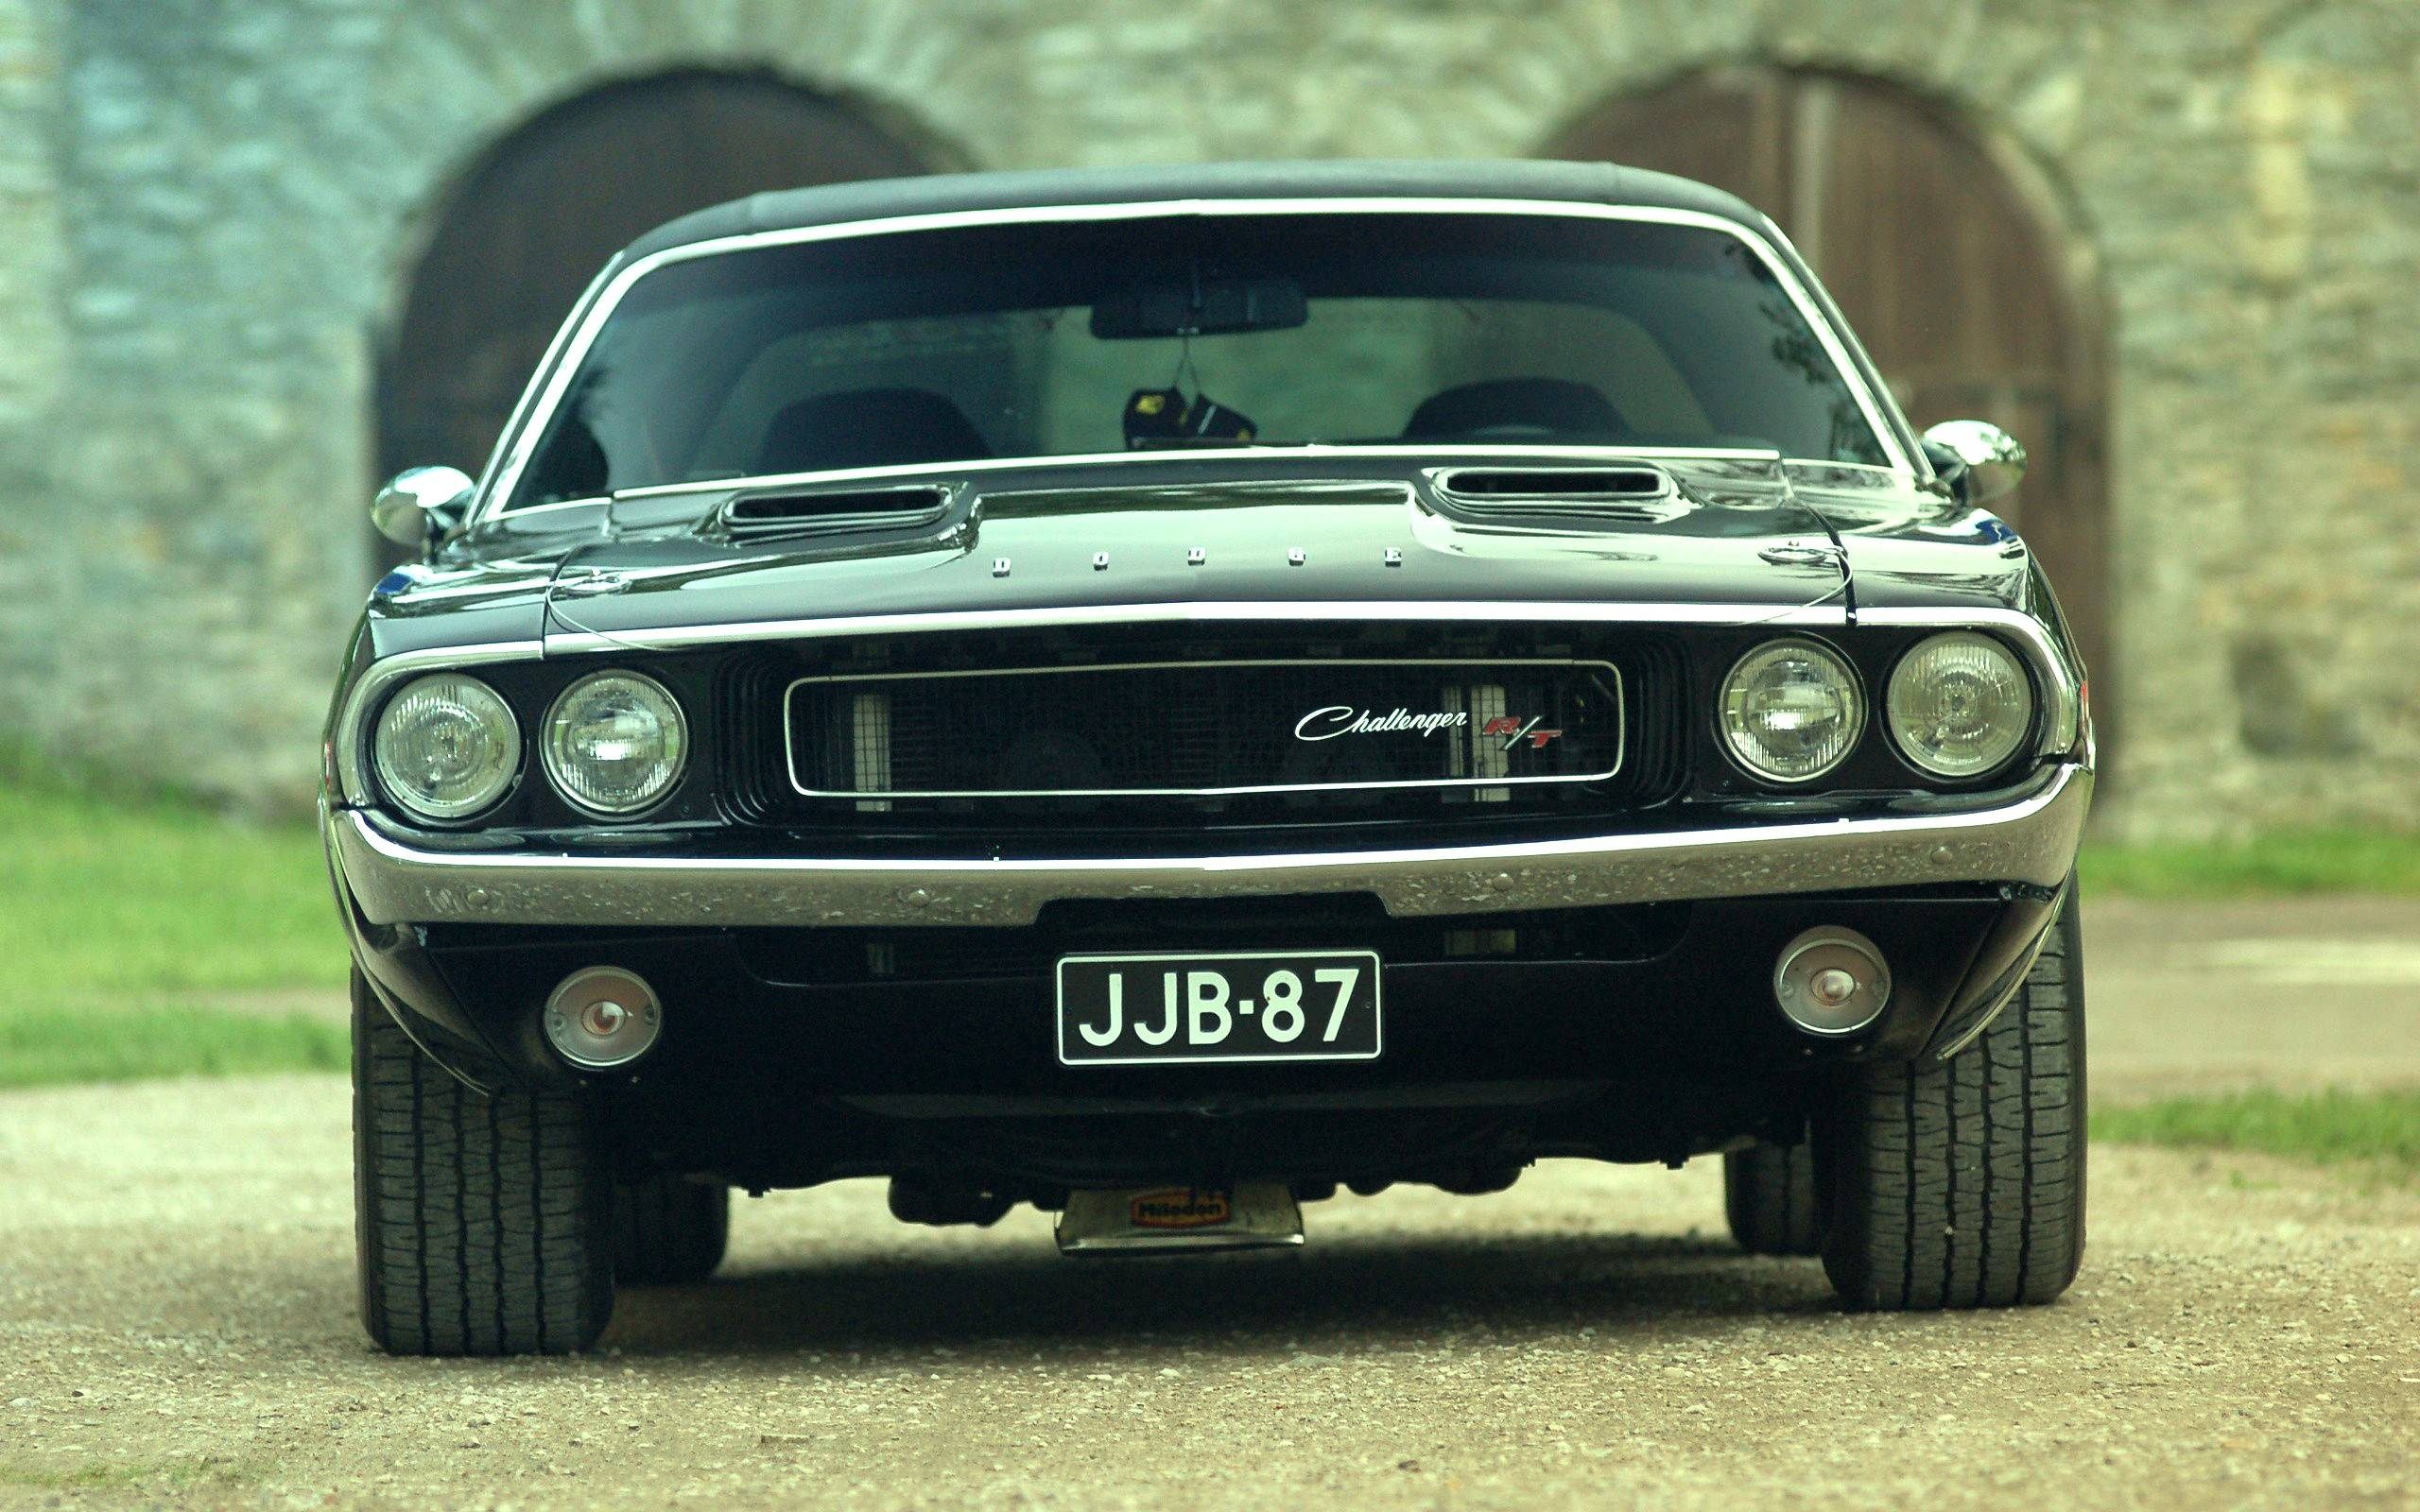 Classic Dodge Challenger Wallpaper By Rogue Rattlesnake On